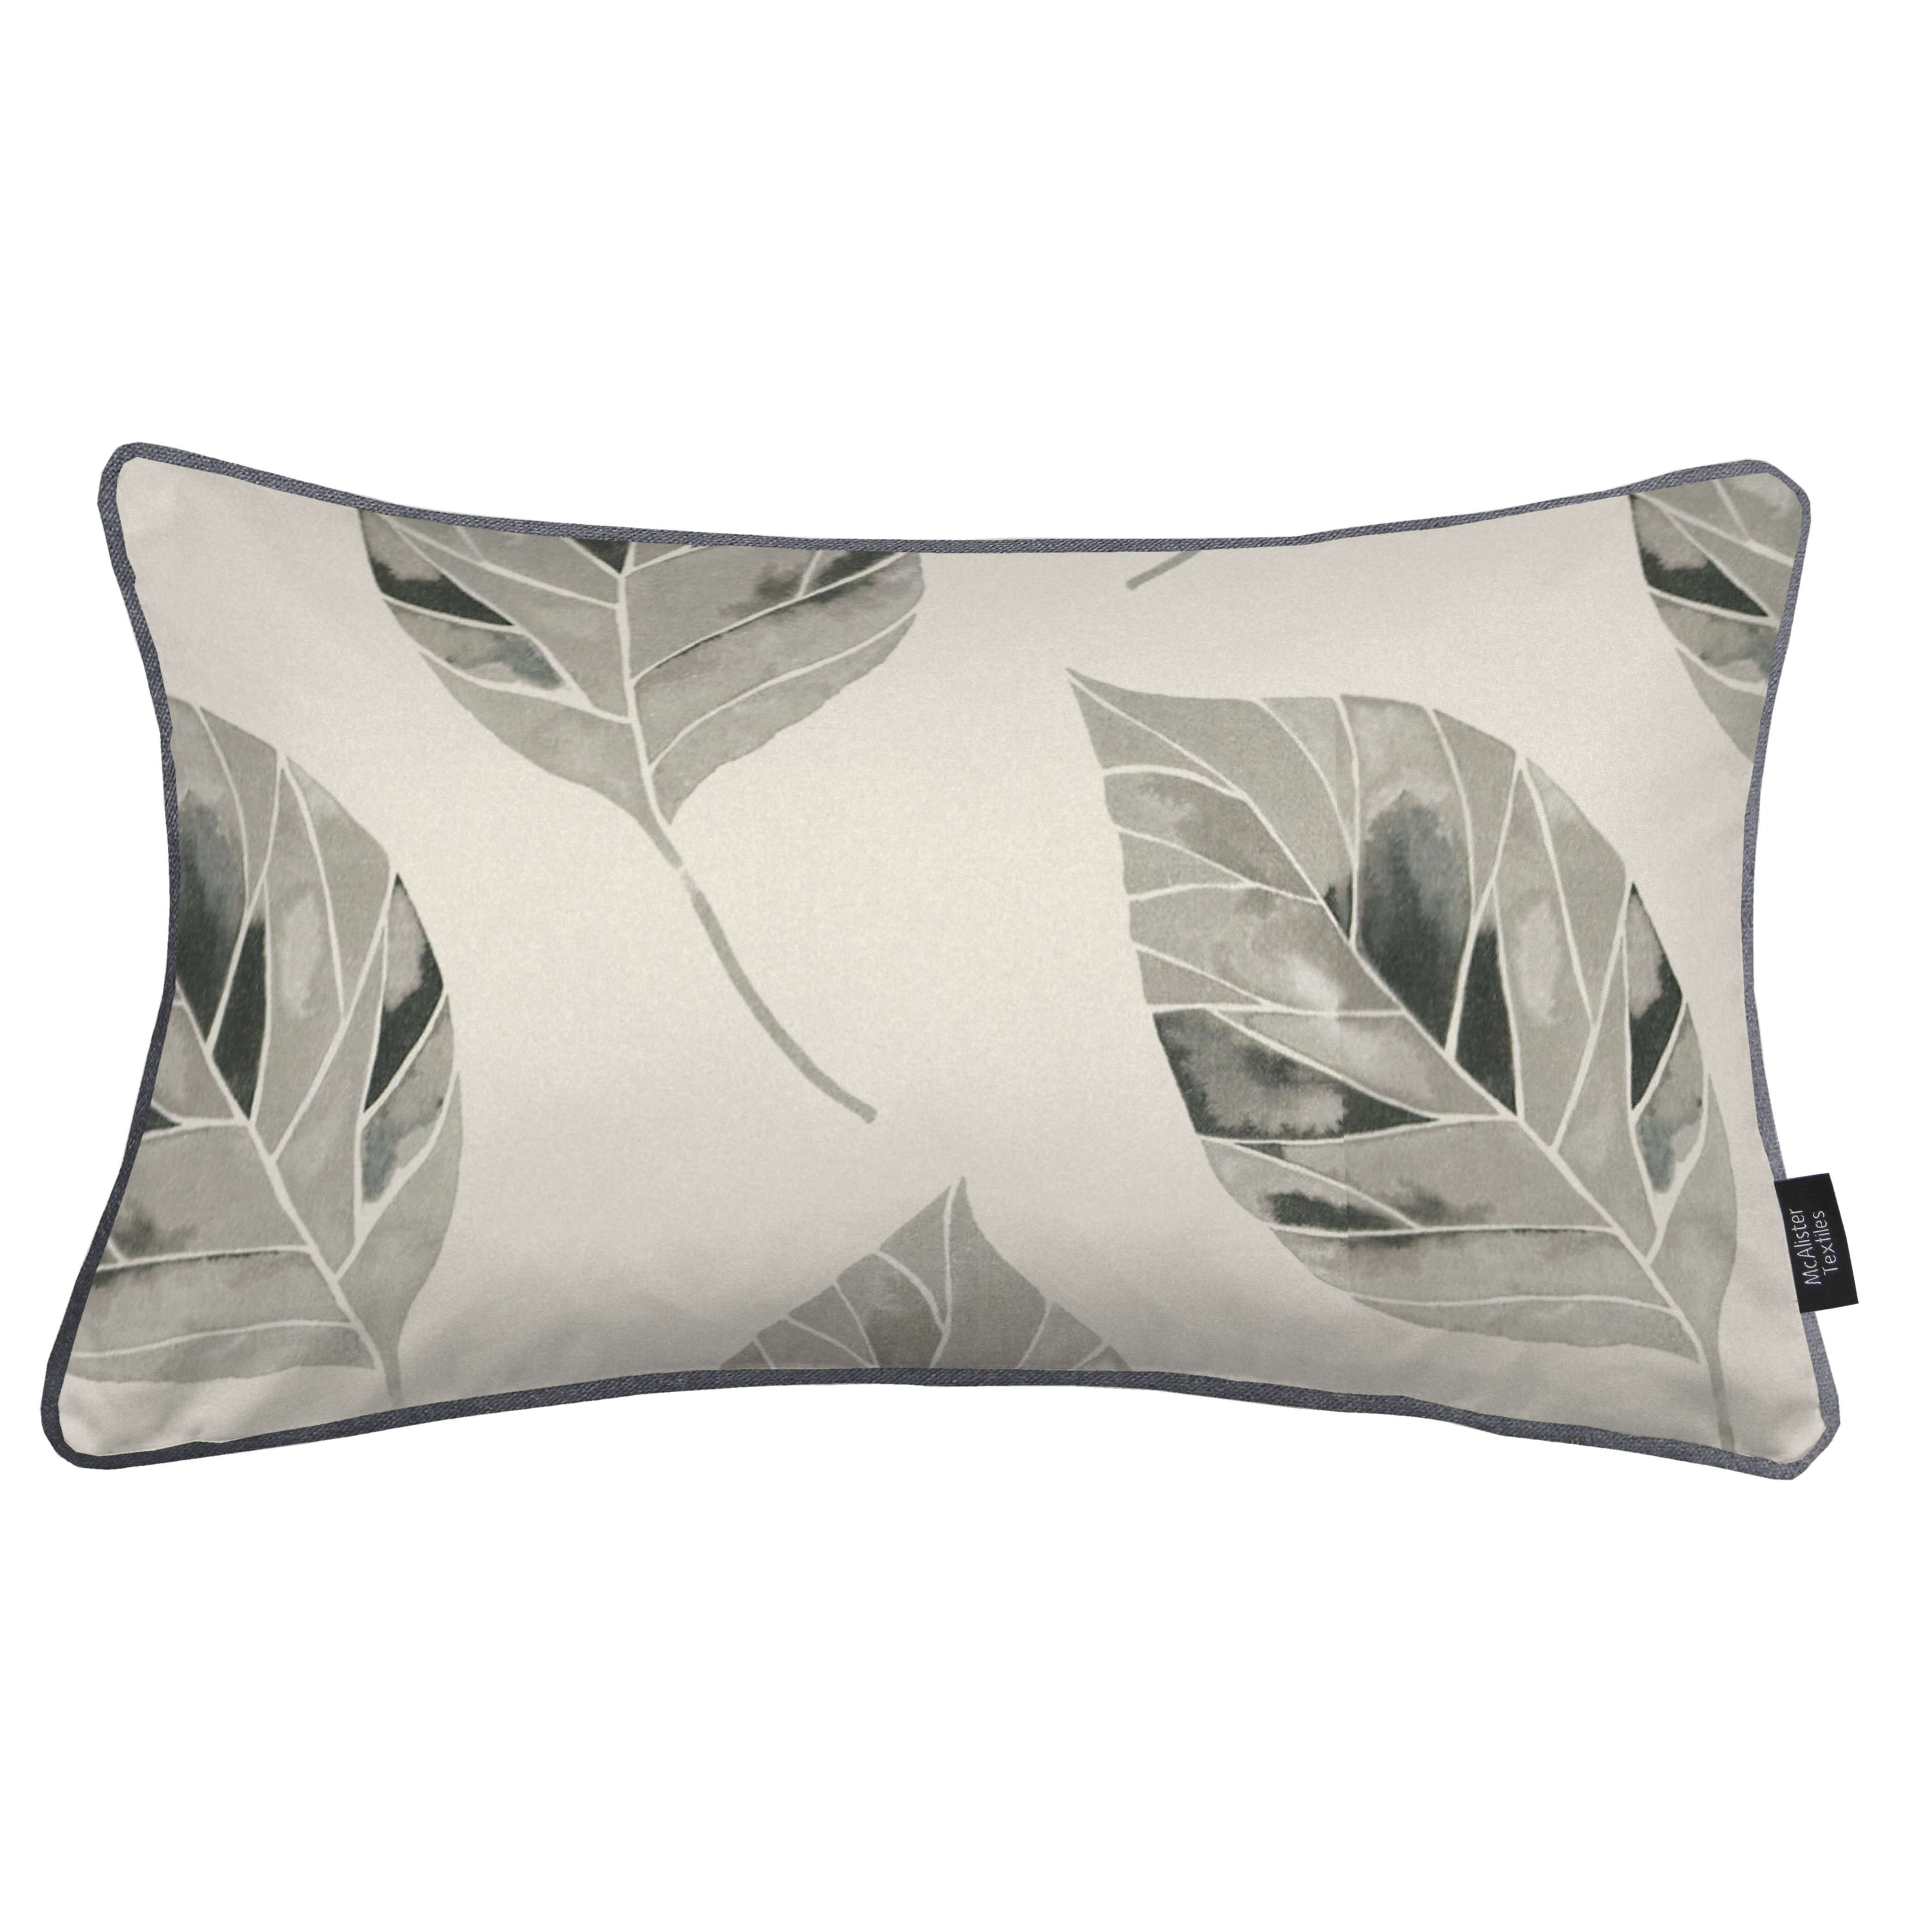 McAlister Textiles Leaf Soft Grey Floral Cotton Print Piped Edge Pillows Pillow Cover Only 50cm x 30cm 